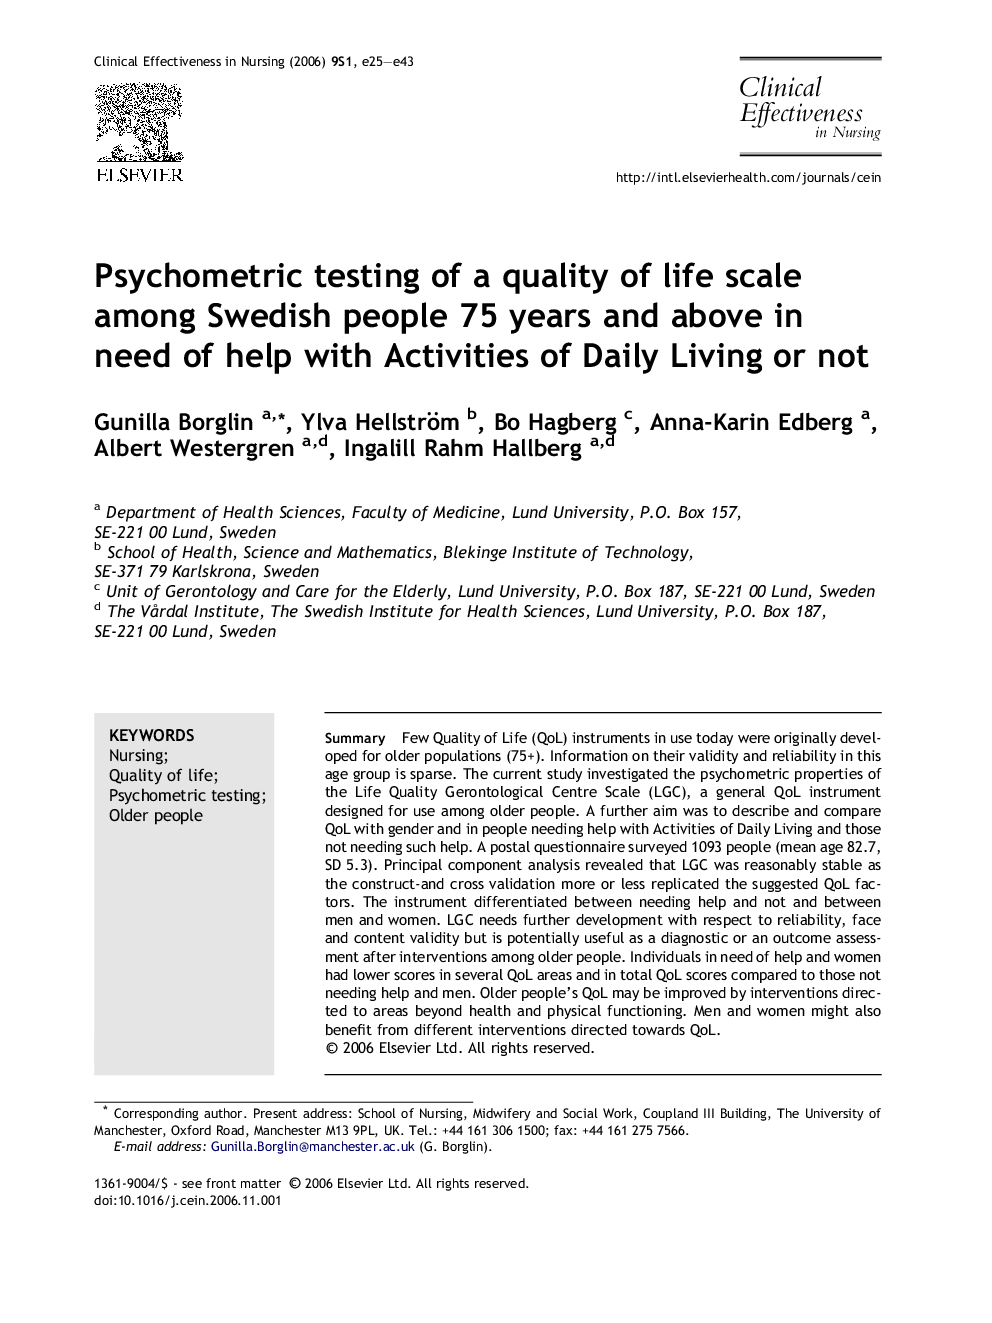 Psychometric testing of a quality of life scale among Swedish people 75 years and above in need of help with Activities of Daily Living or not